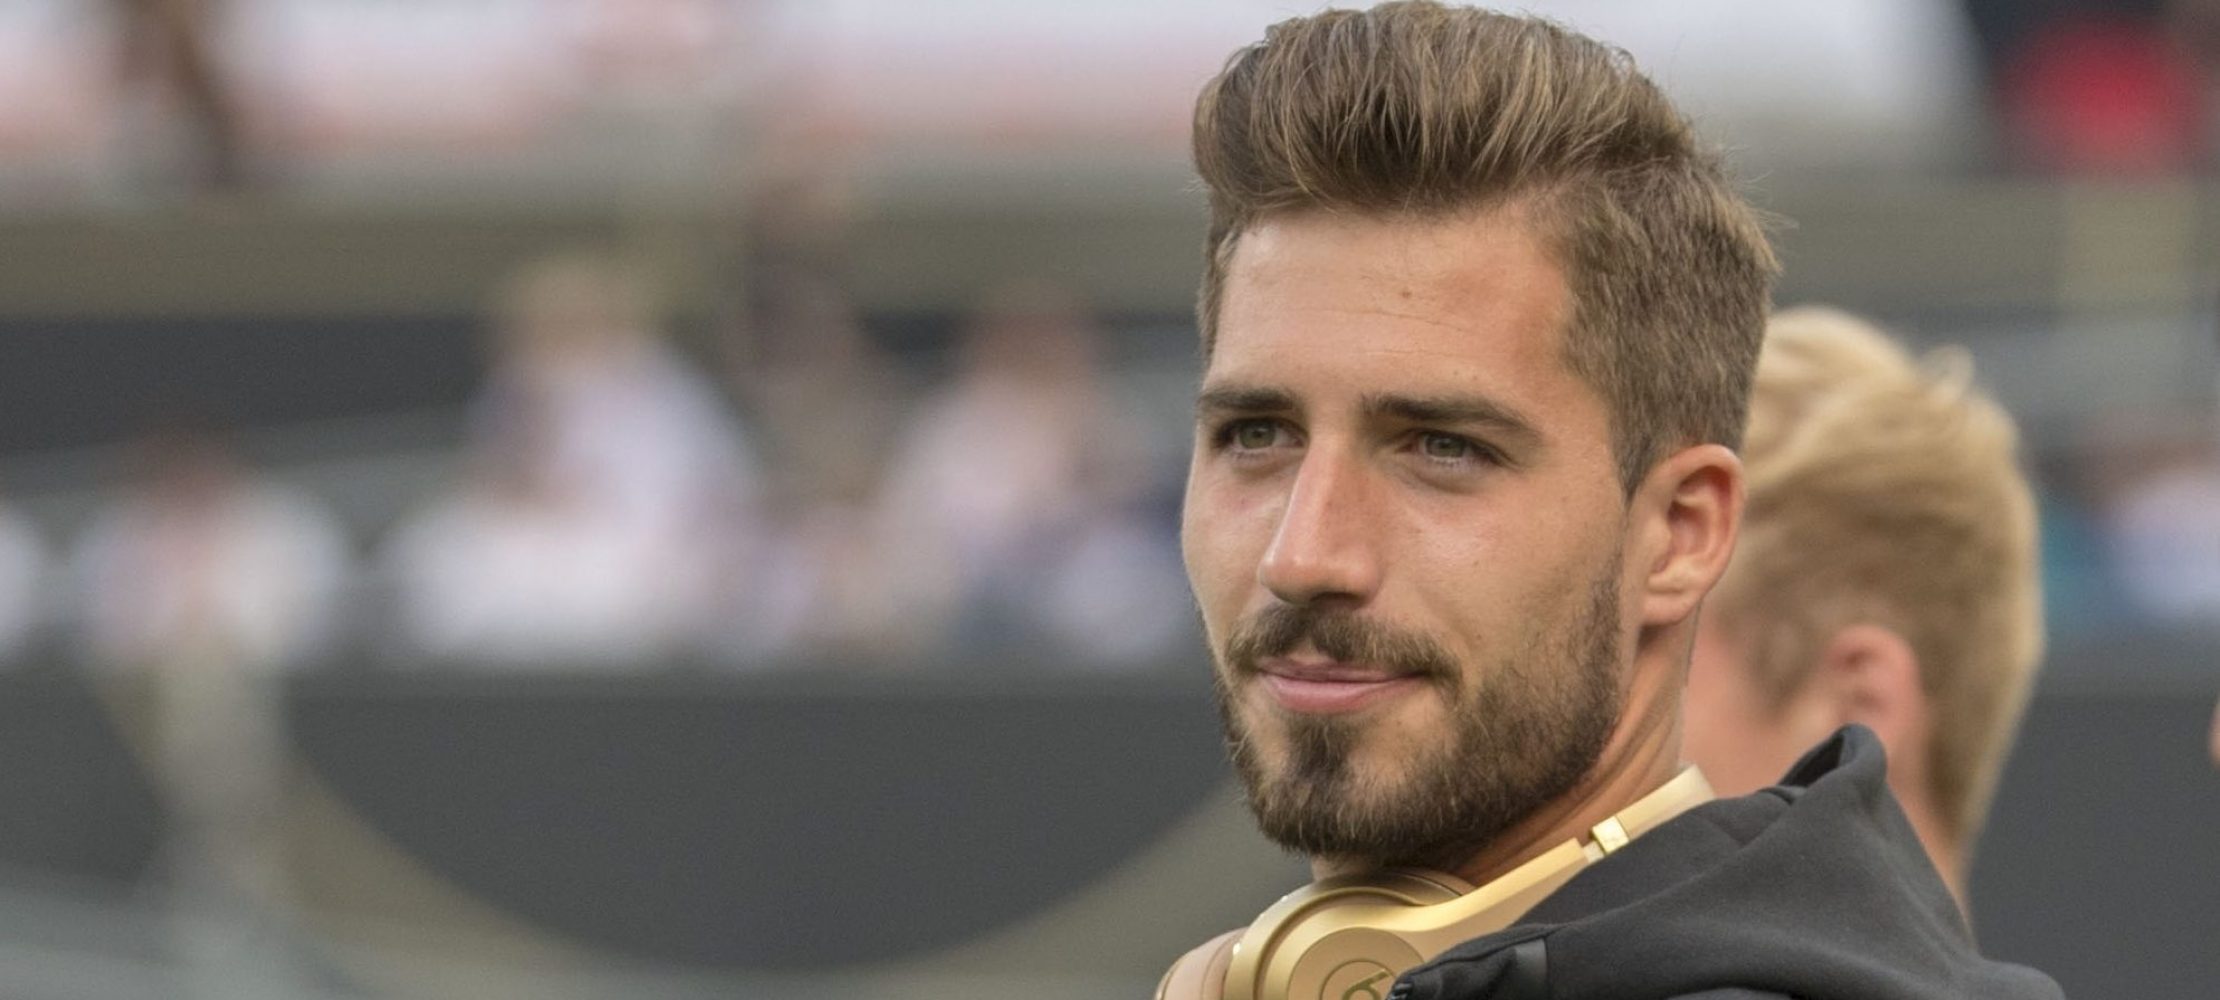 Bayern  Germany on Twitter Kevin Trapp has confirmed his starting spot  at PSG ahead of Sirigu He played 2 league games and kept 2 clean sheets  httptcoyfO7oozqsn  Twitter